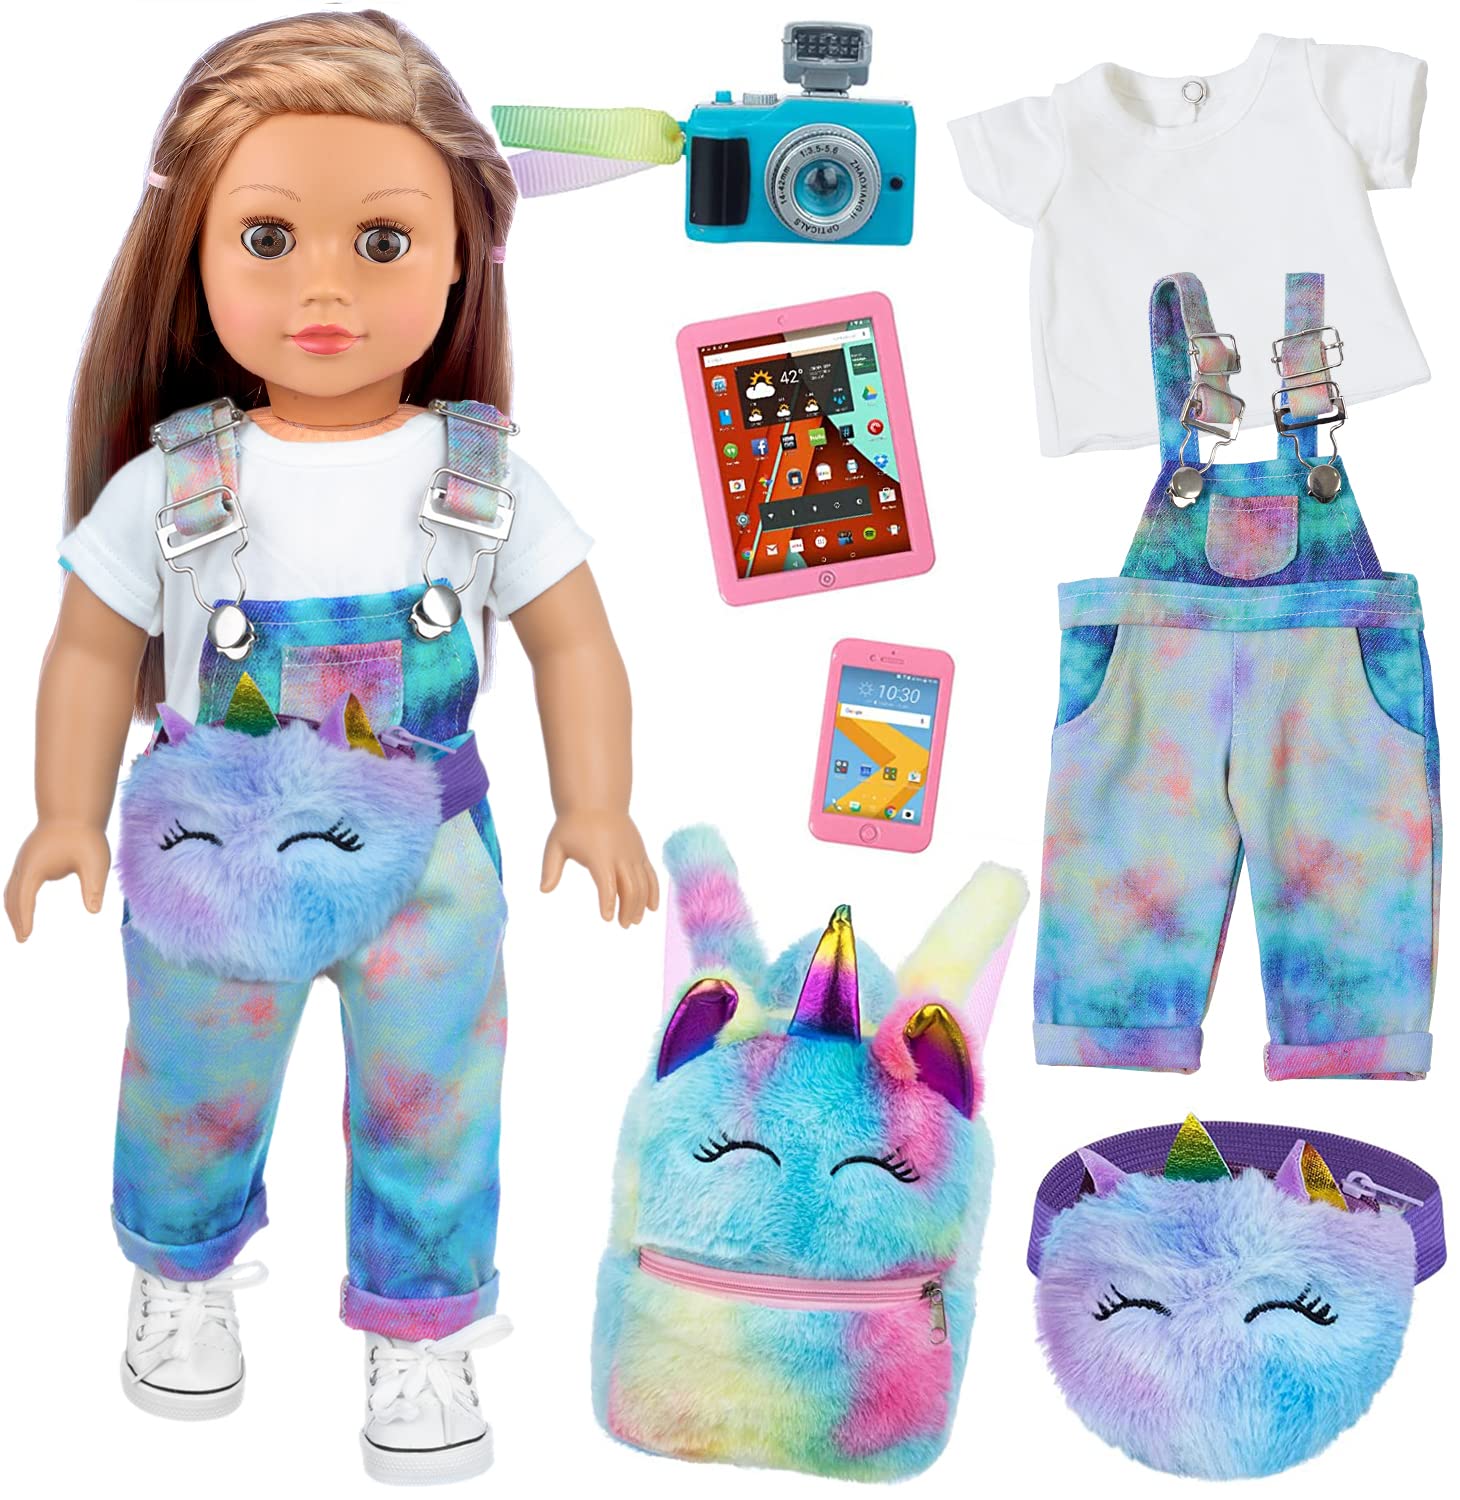  BDDOLL 23 Pcs 18 Inch Girl Doll Clothes and Accessories for 18  Inch Doll Dress with Our Generation Dolls Including 10 Complete Sets of Clothing  Outfits : Toys & Games